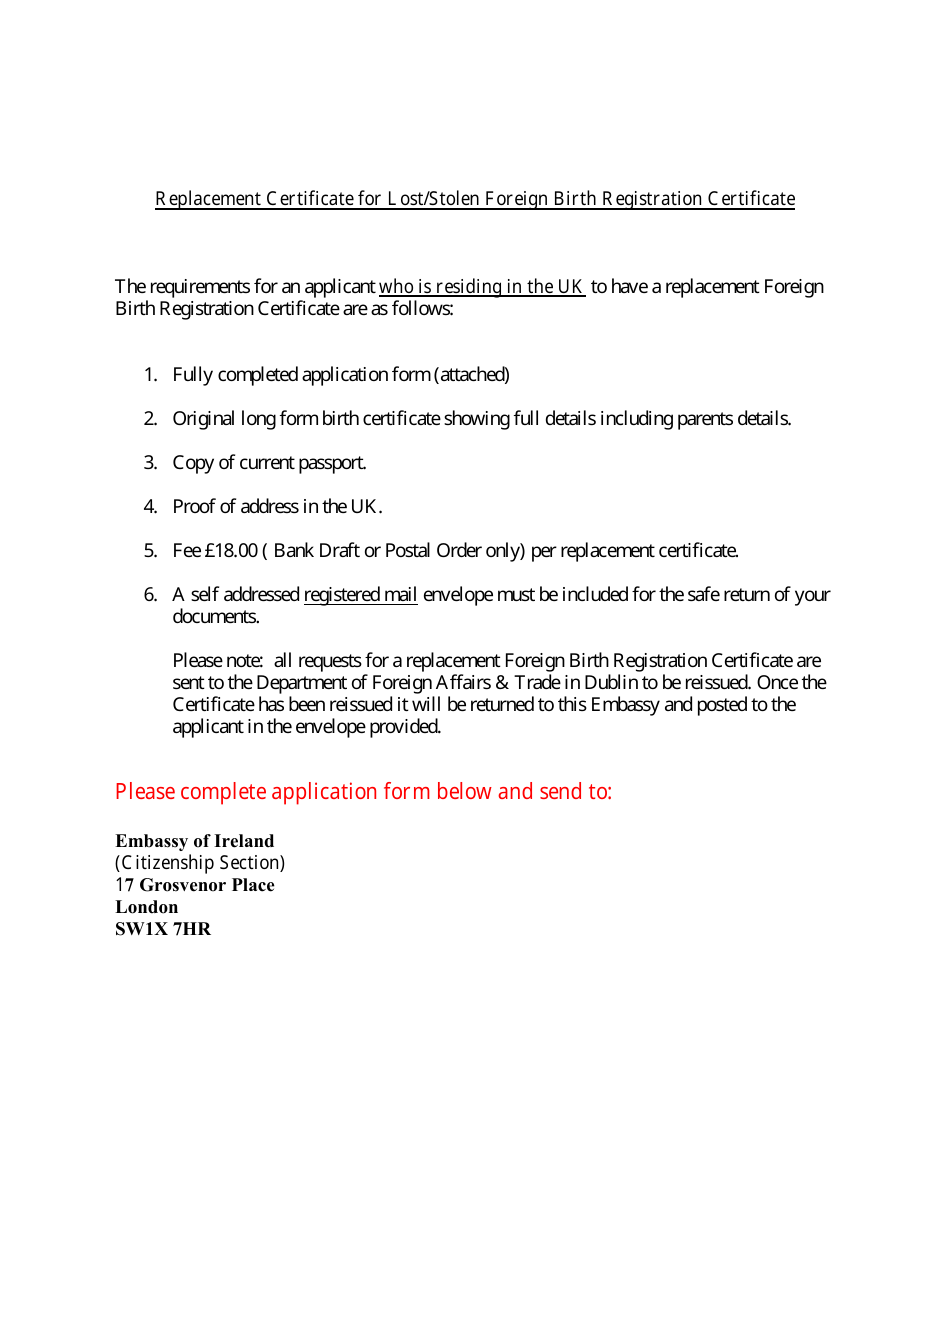 Replacement Certificate Form for Lost / Stolen Foreign Birth Registration Certificate - Ireland, Page 1